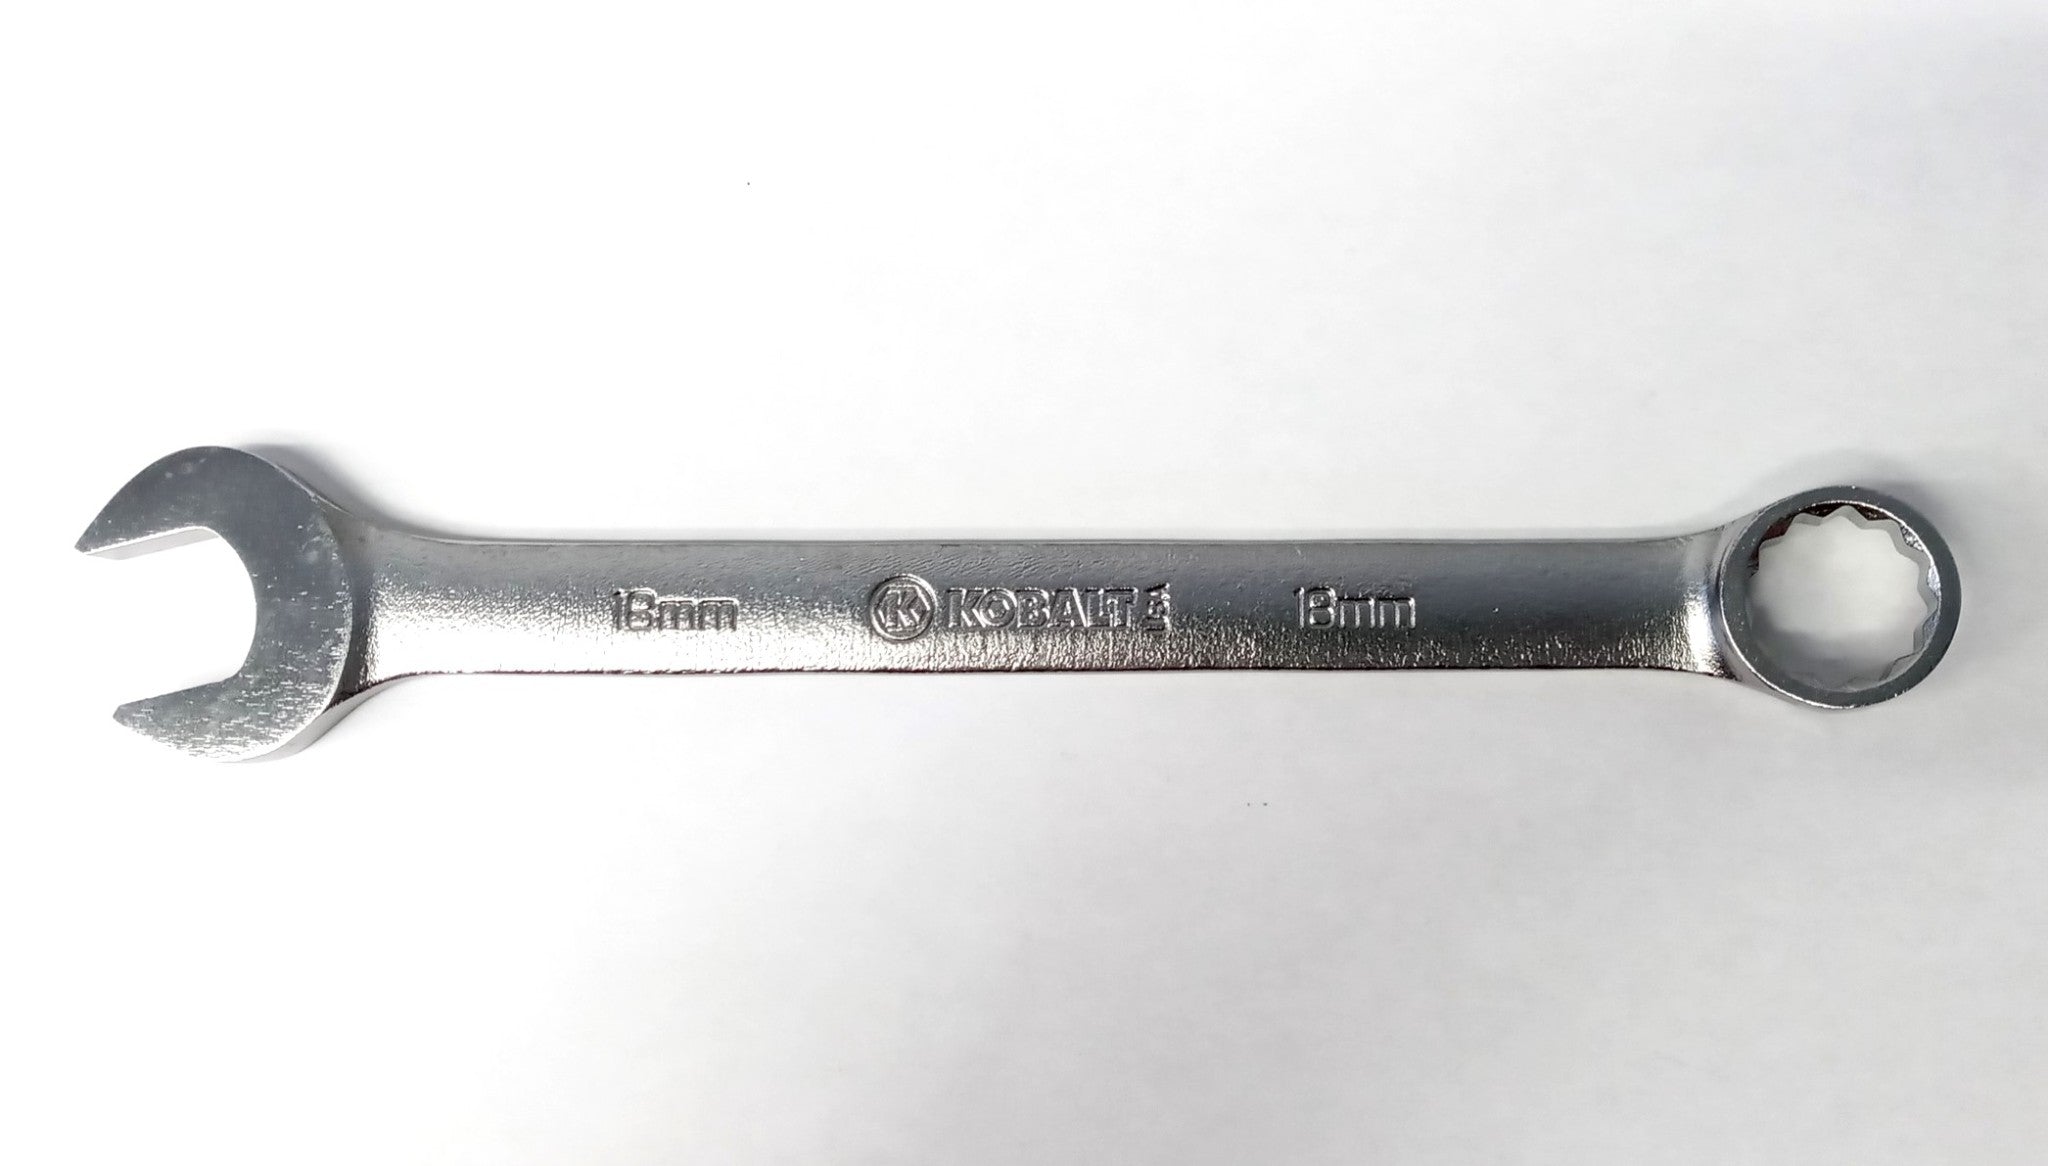 Kobalt 22918 18mm 12 Point Combination Wrench USA